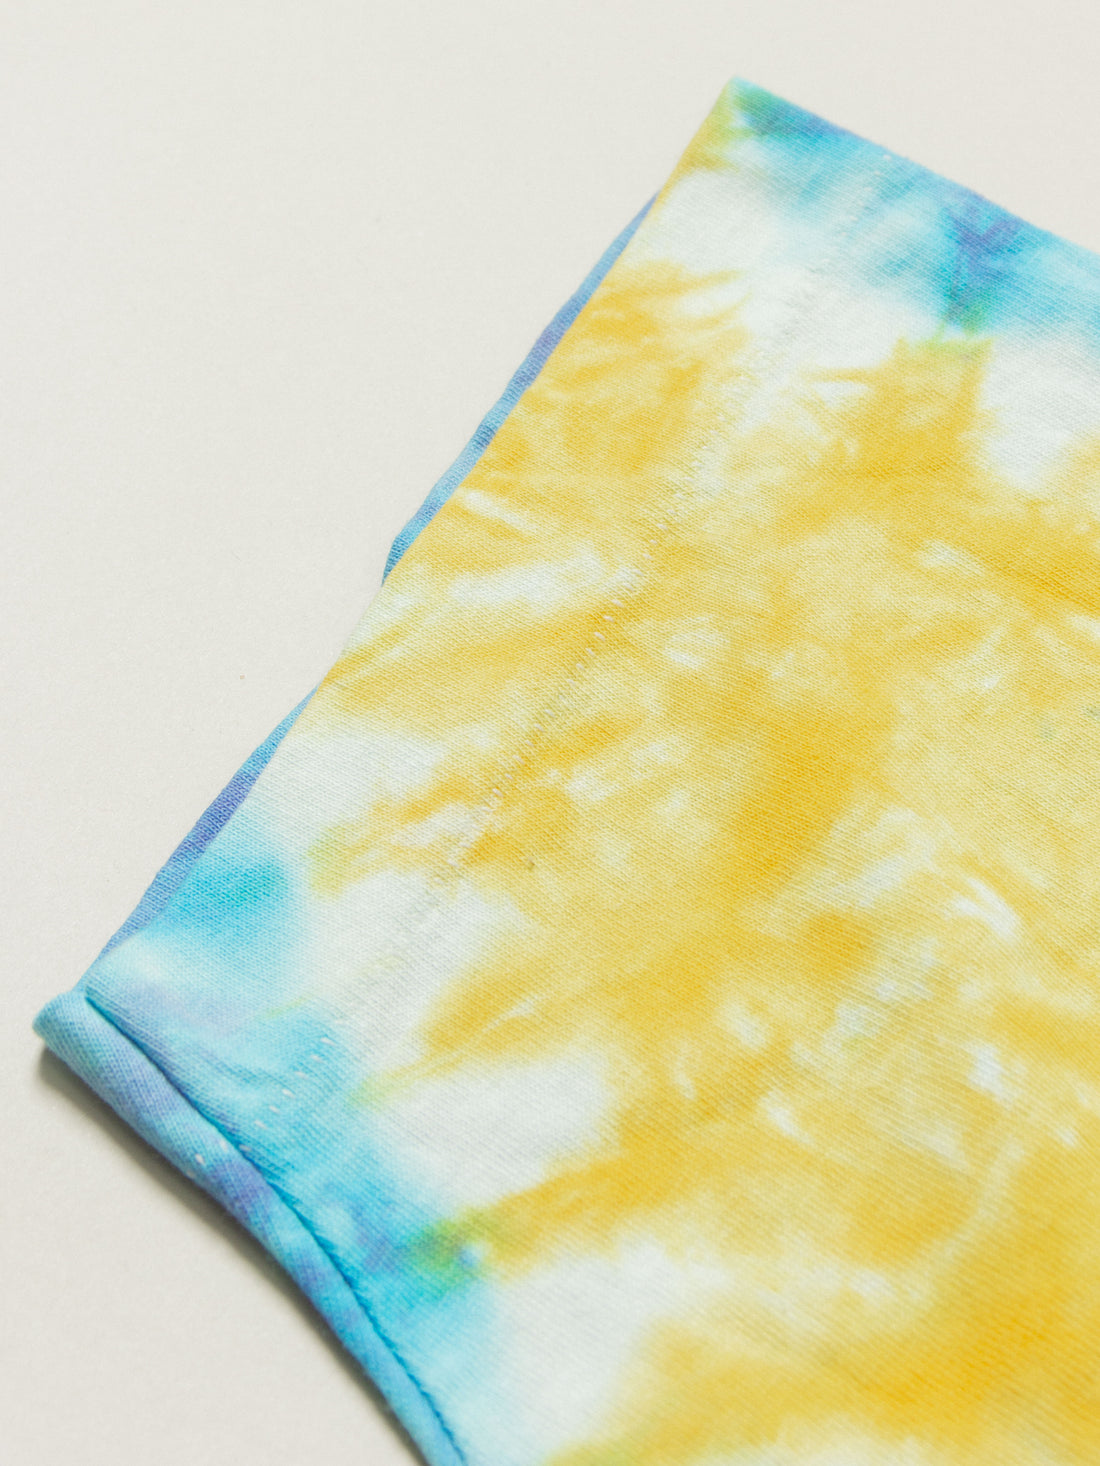 Vintage All Over Print Single-Stitched Guns N' Roses Tie Dye Tee. Fruit of The Loom tag. 